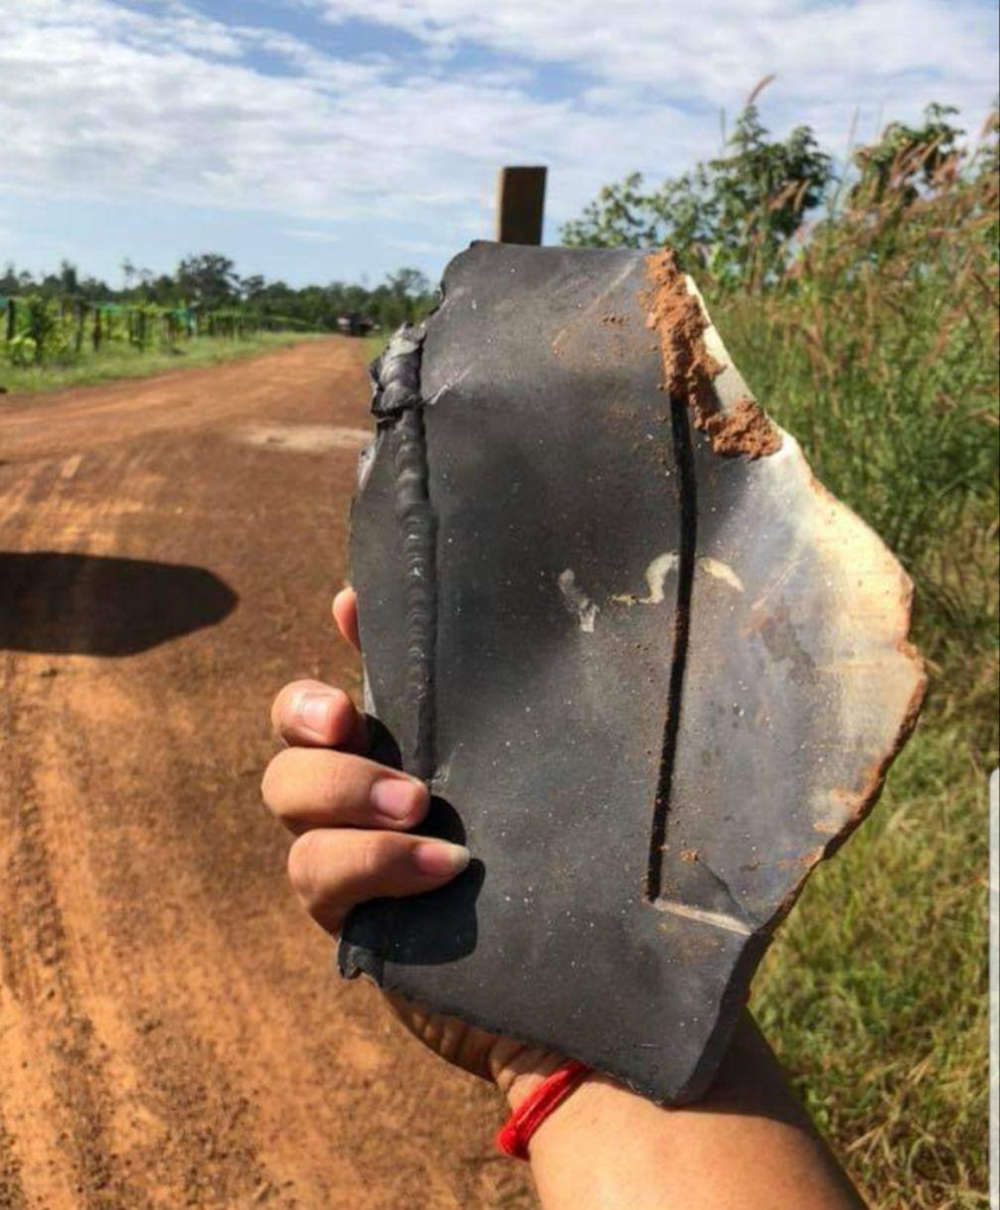 MYSTERY PIECES OF UFO LAND IN REMOTE VILLAGE IN CAMBODIA